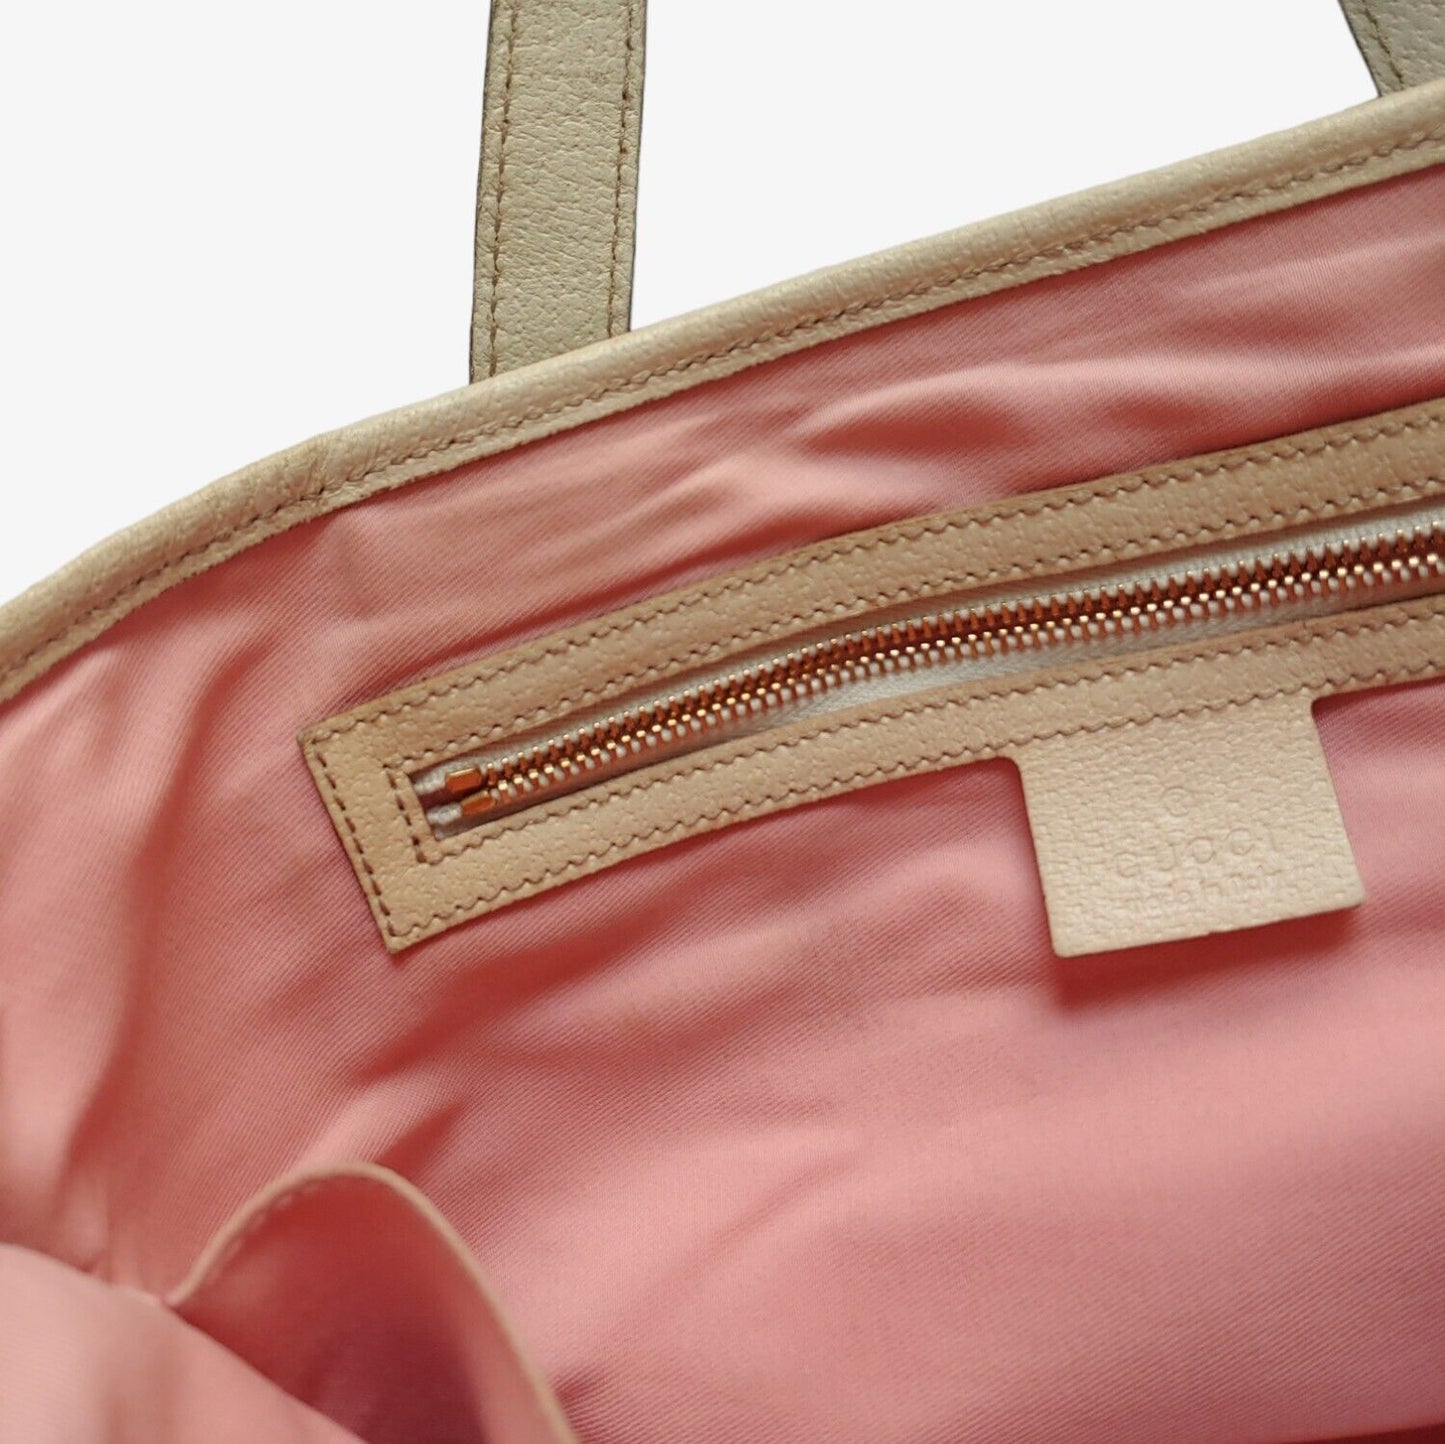 Vintage 90s Gucci GG Small Pink Canvas Handbag With Leather Handles 139261002046 Inside Zip - Casspios Dream